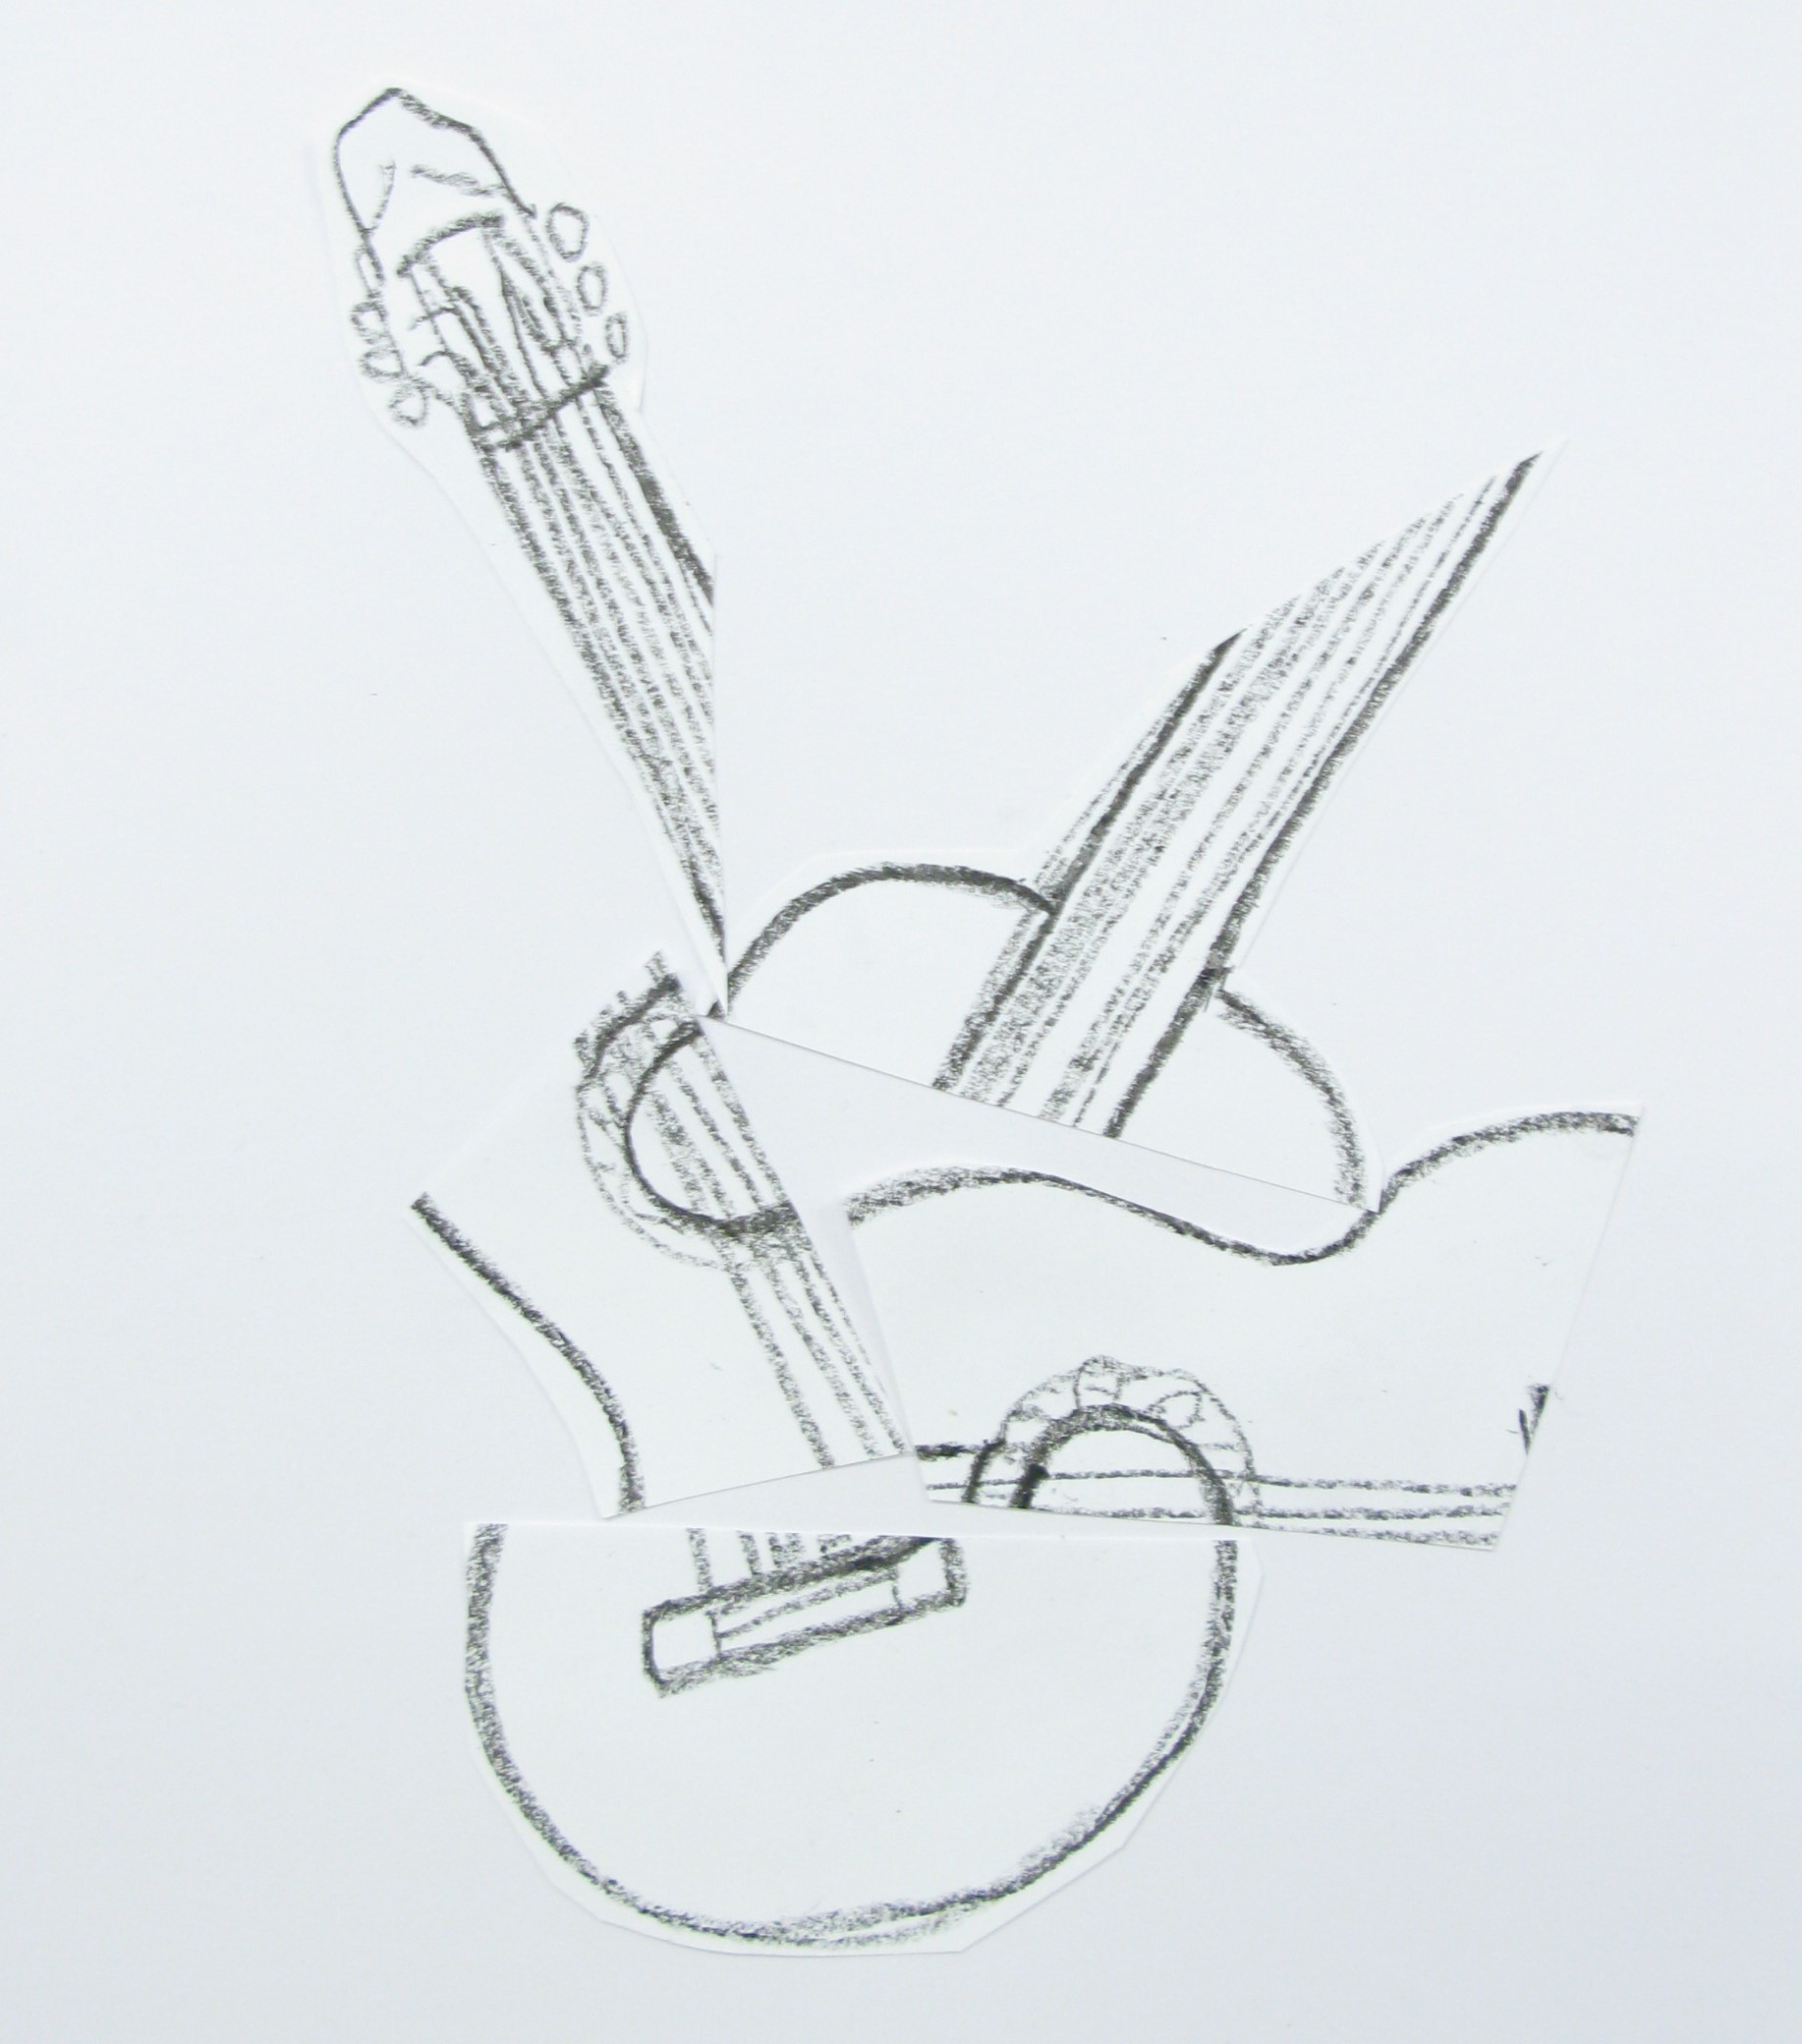 Abstracted guitar drawing